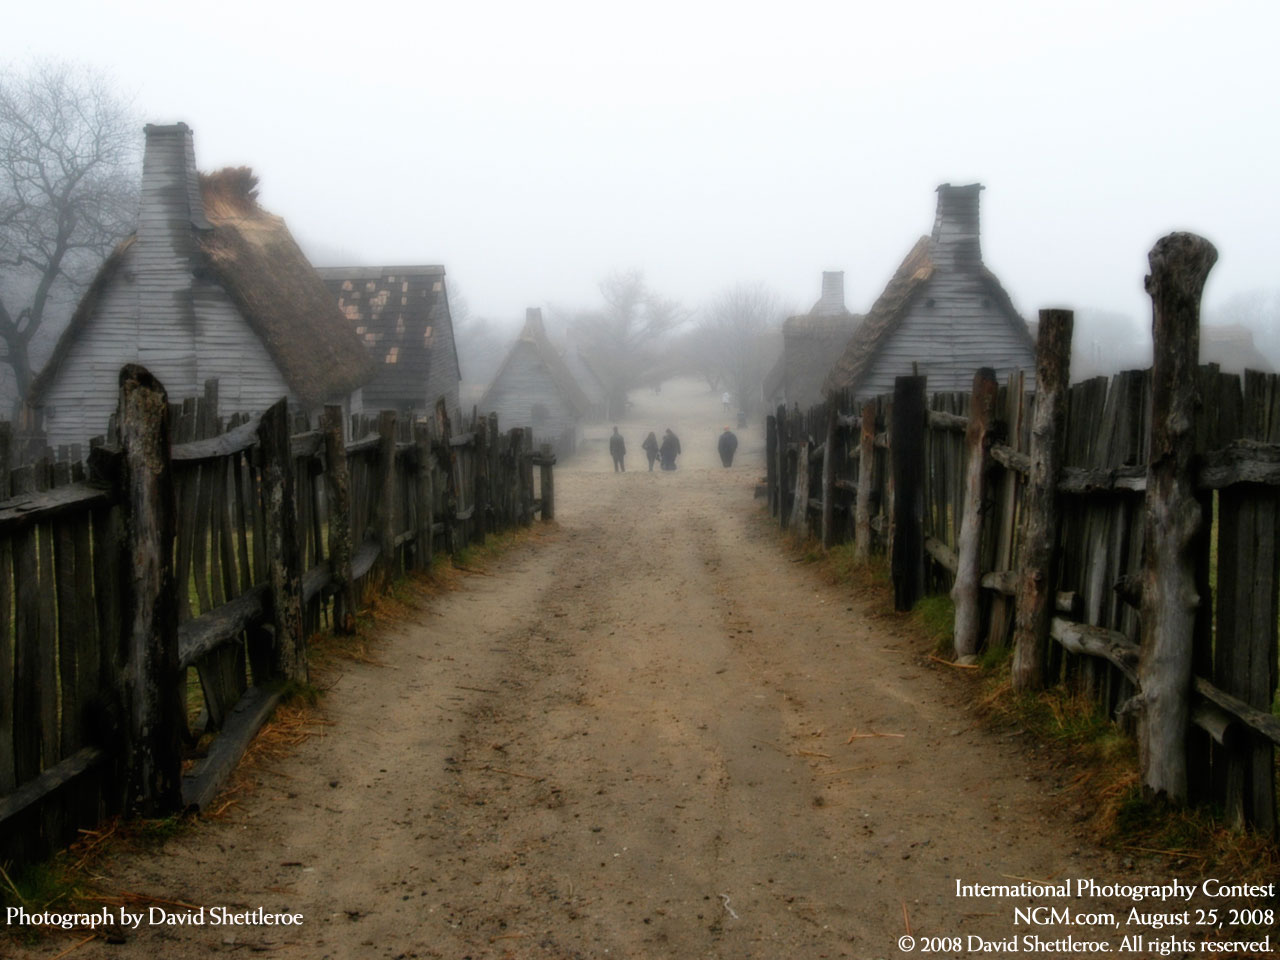 Above A National Geographic Photo Of The Reconstructed Plimoth